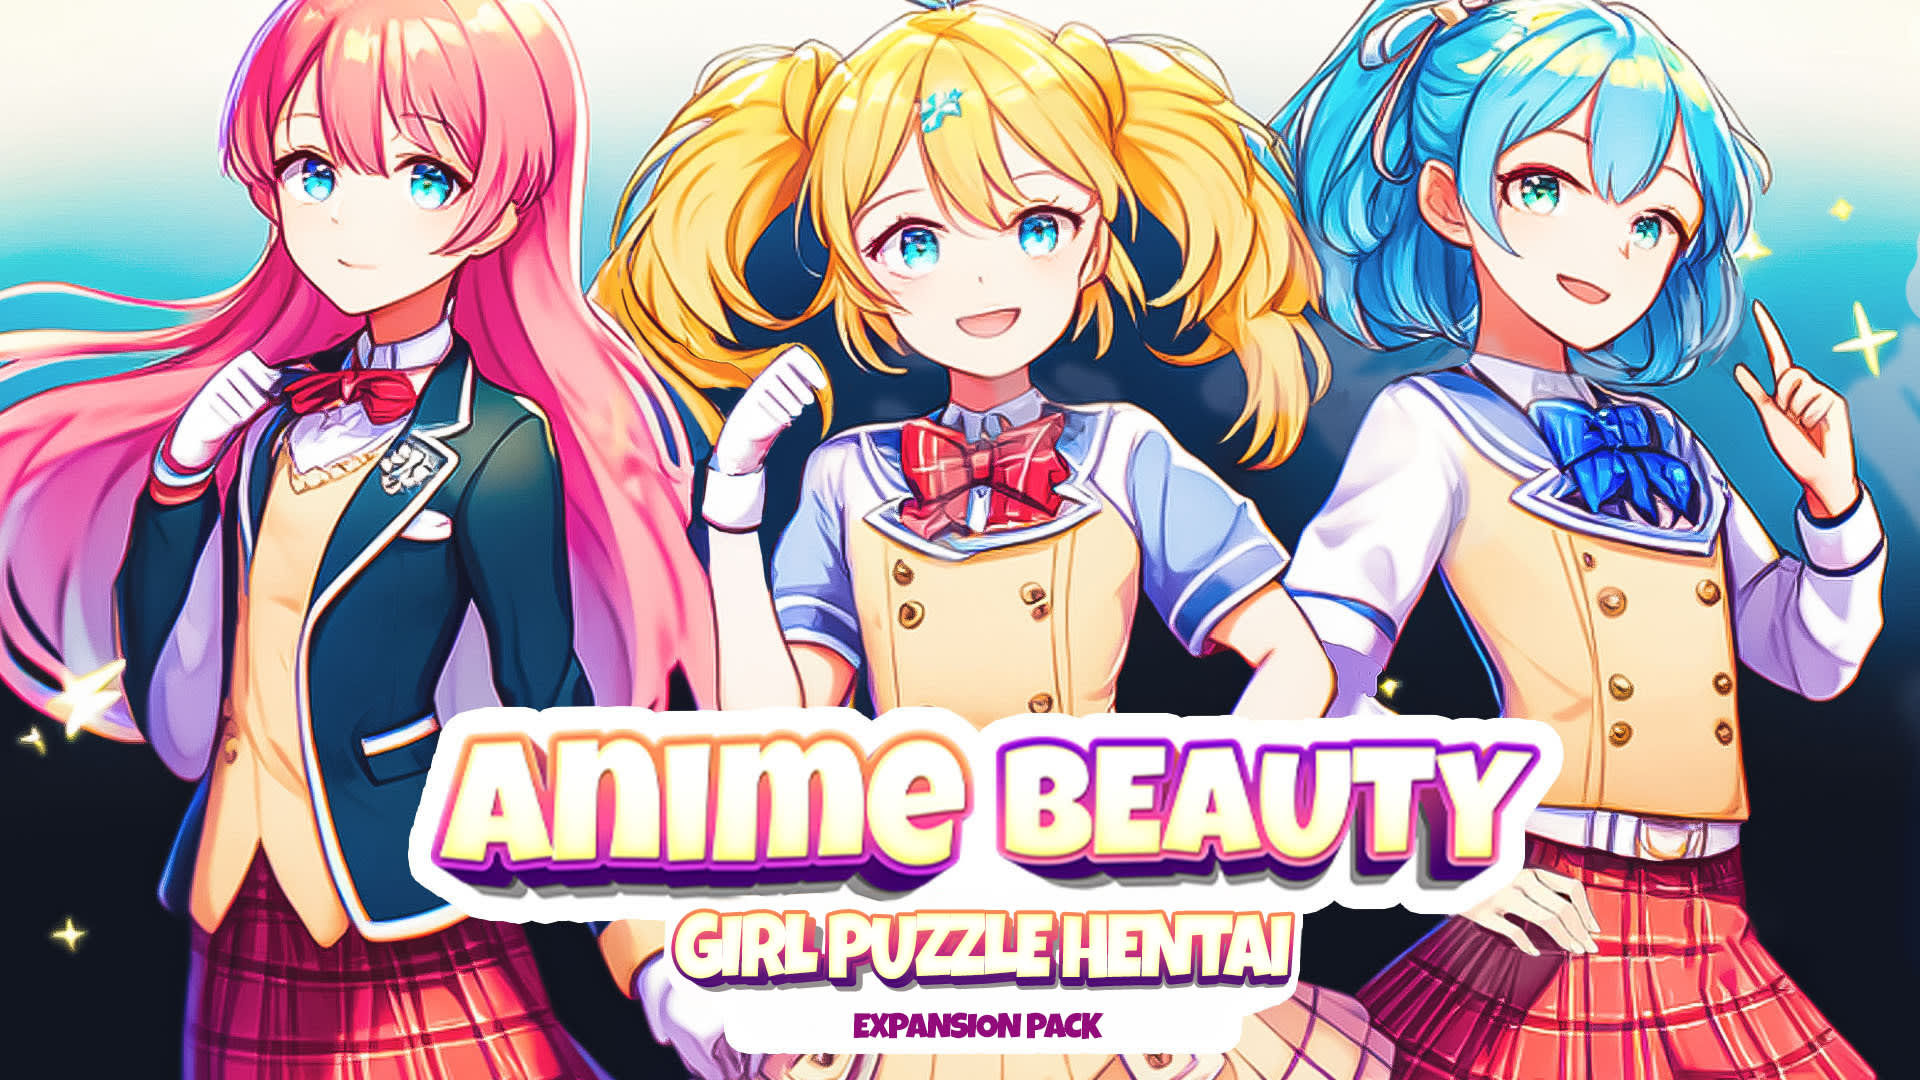 Anime Beauty Girl Puzzle Hentai - Expansion Pack